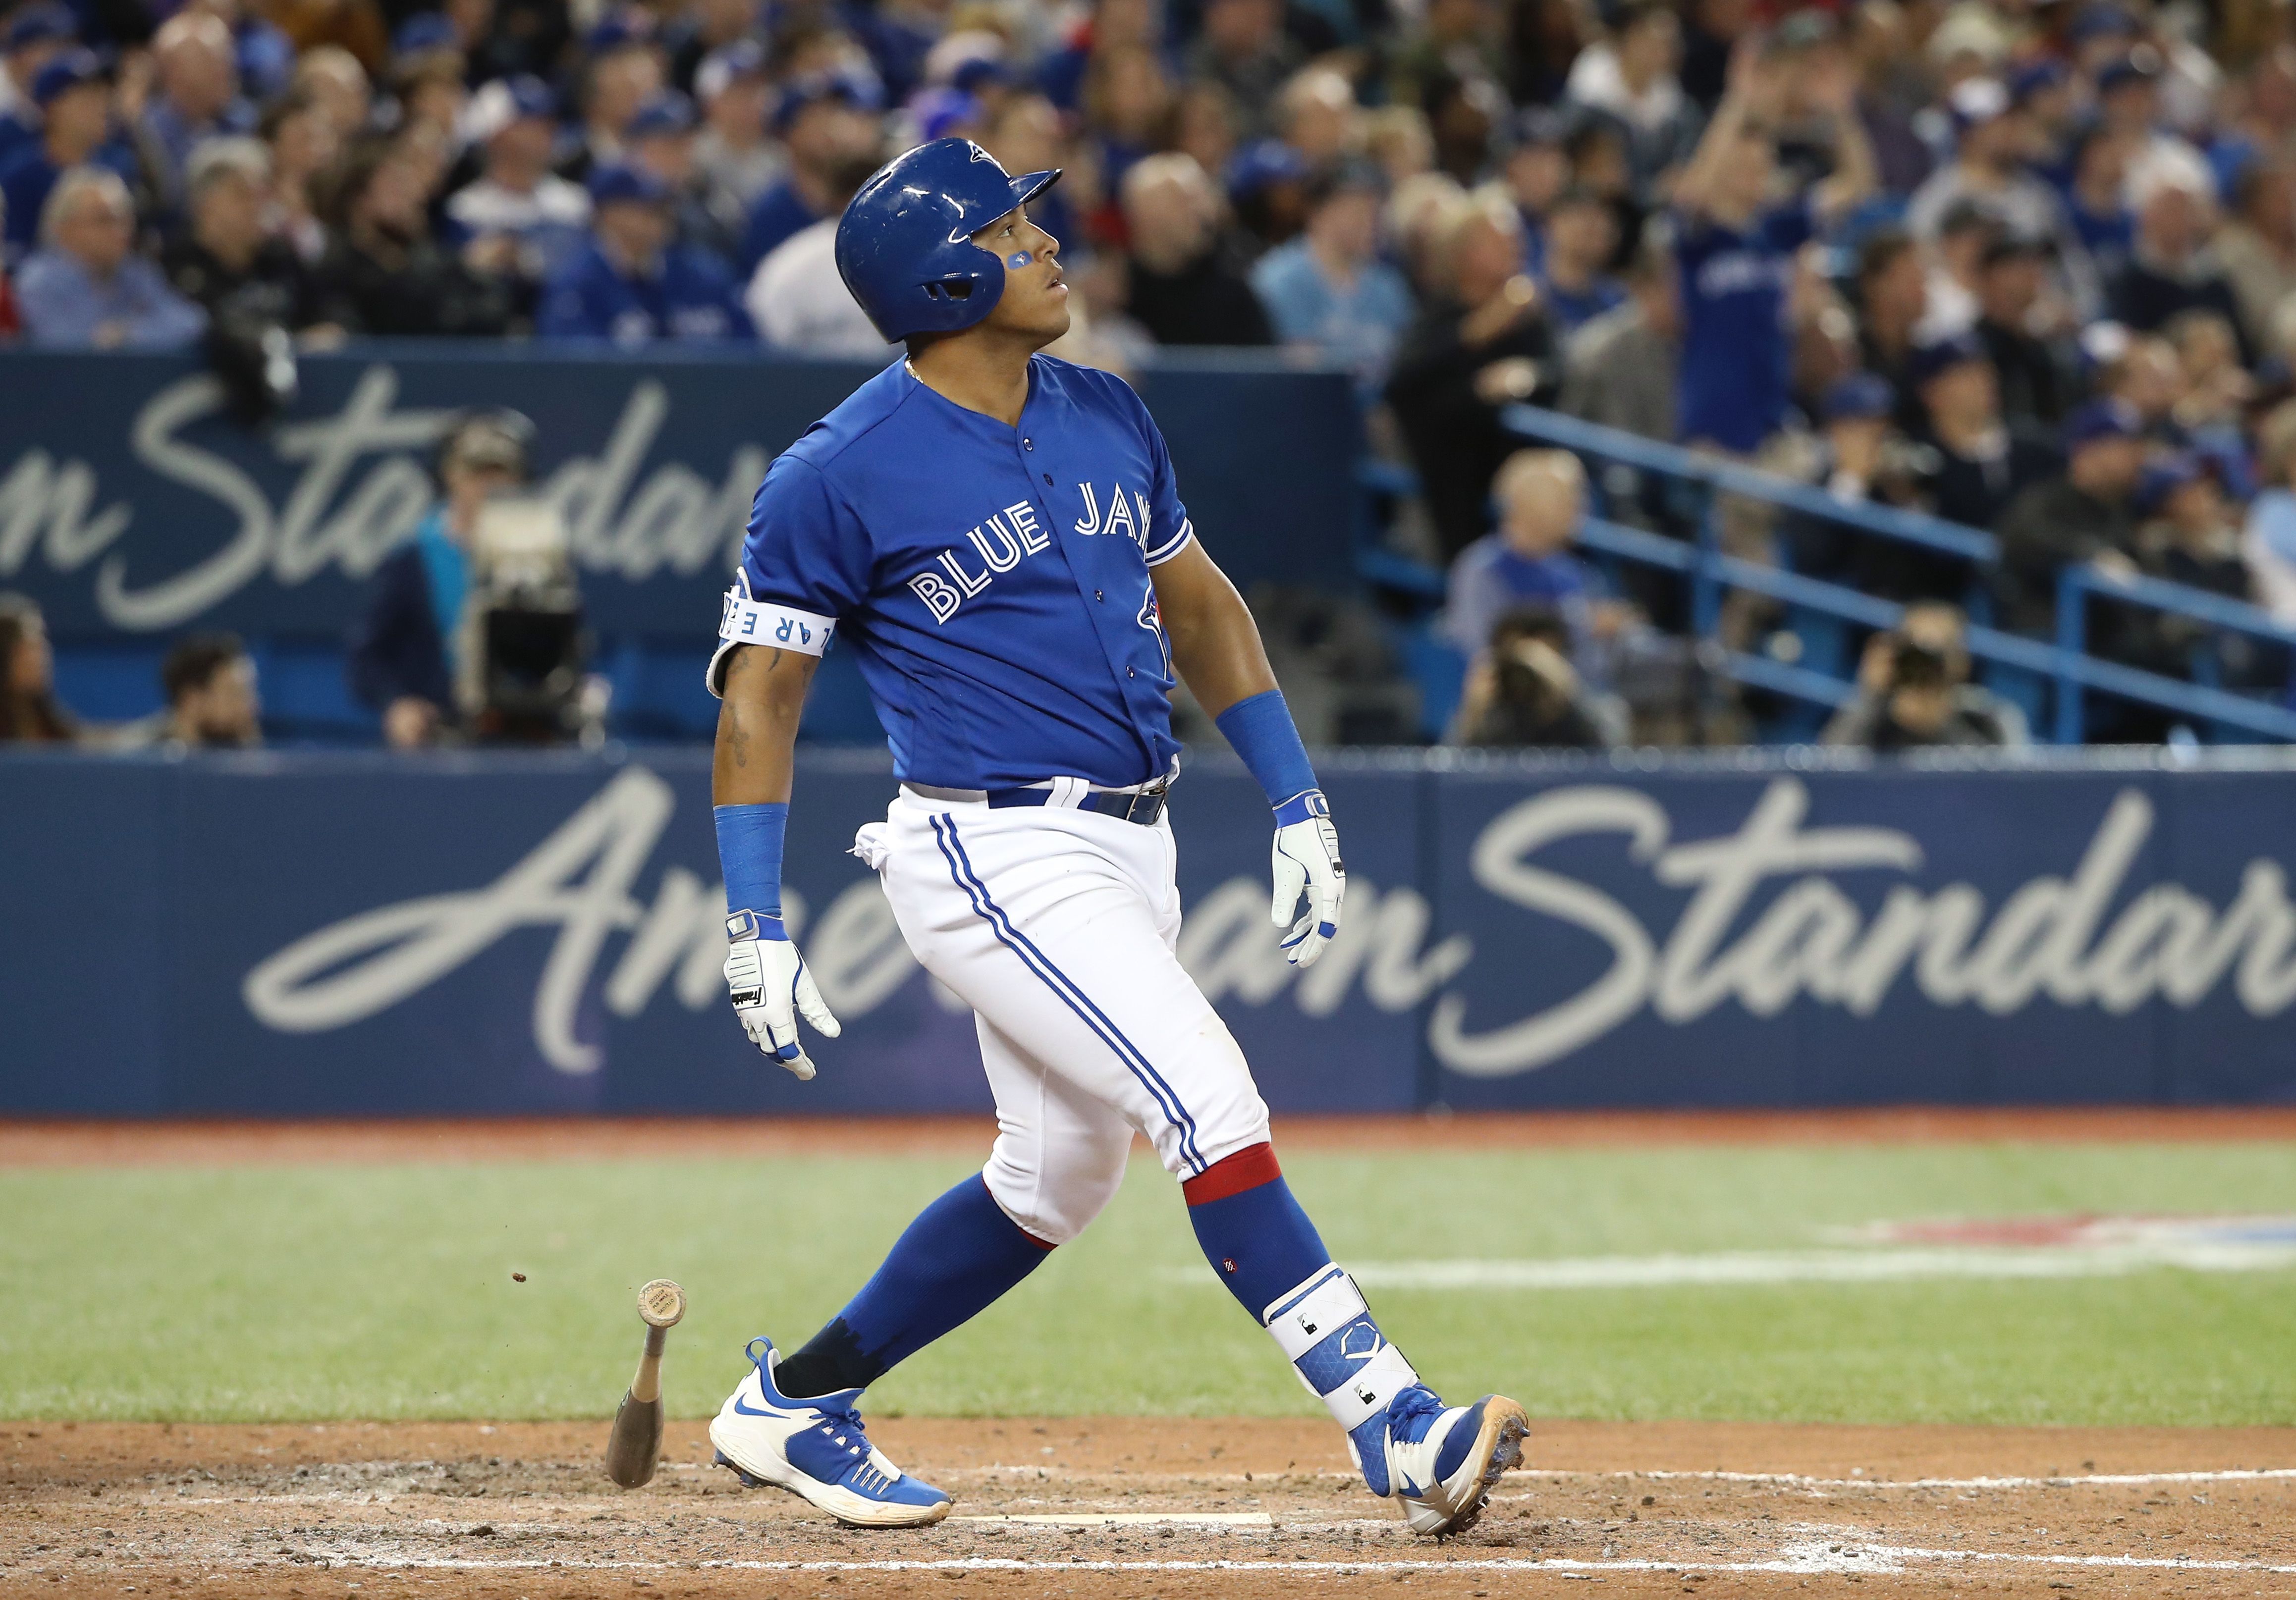 Toronto Blue Jays: Be patient with offence, runs will come